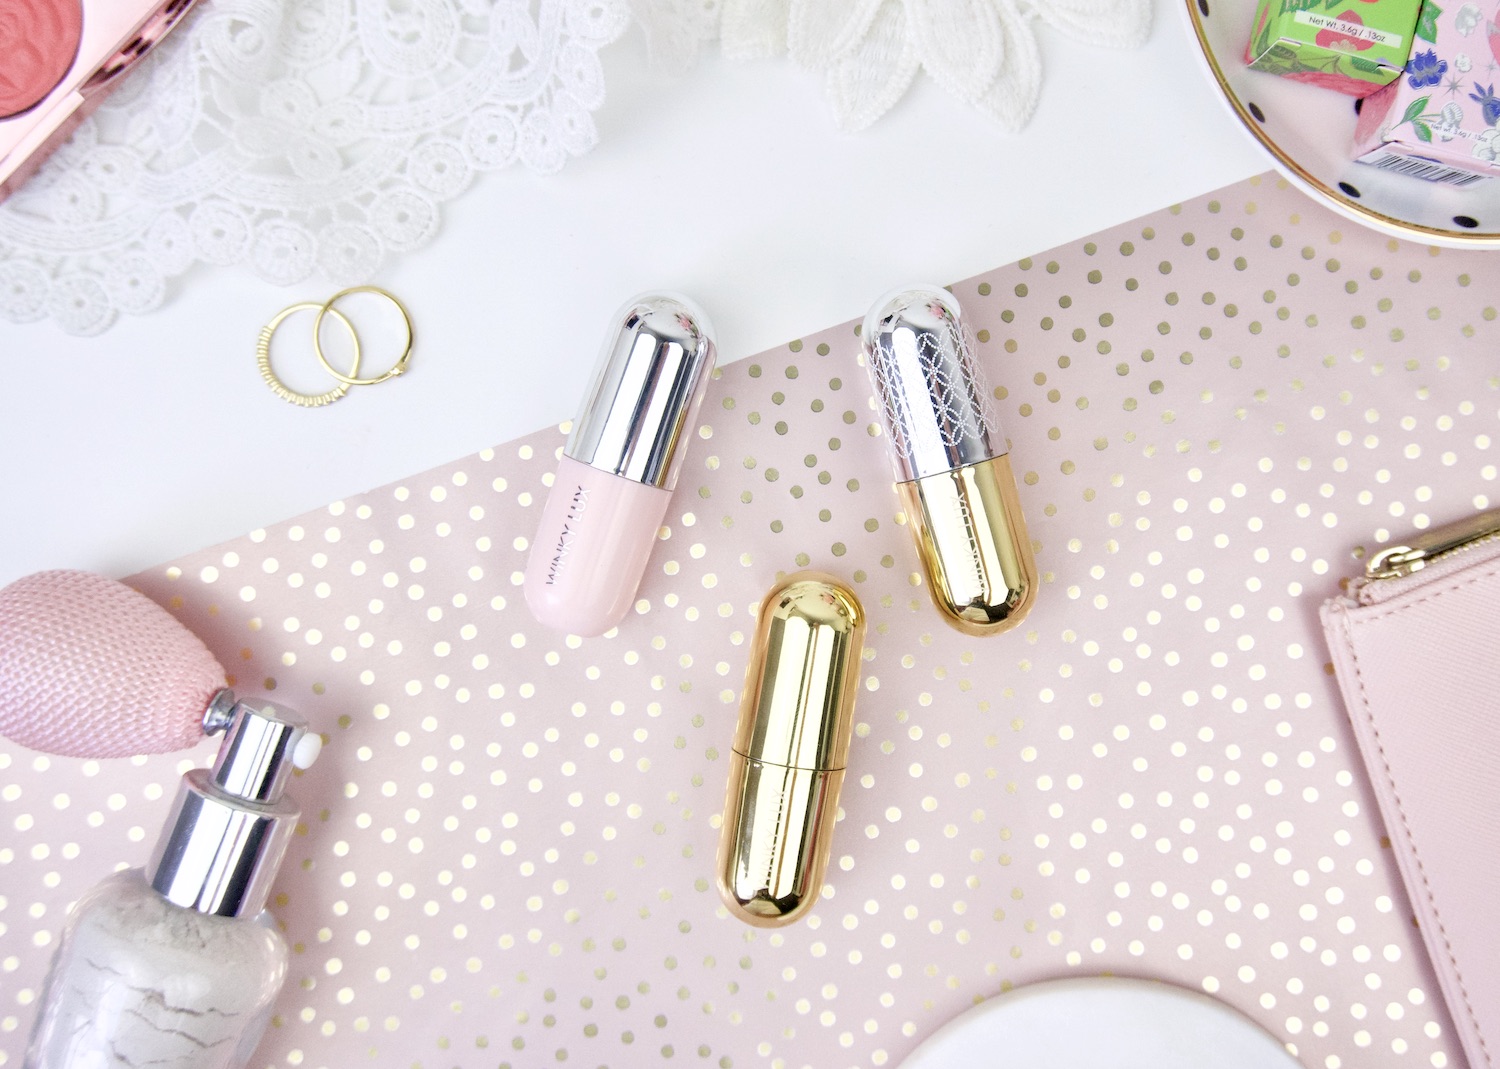 Winky Lux lip products